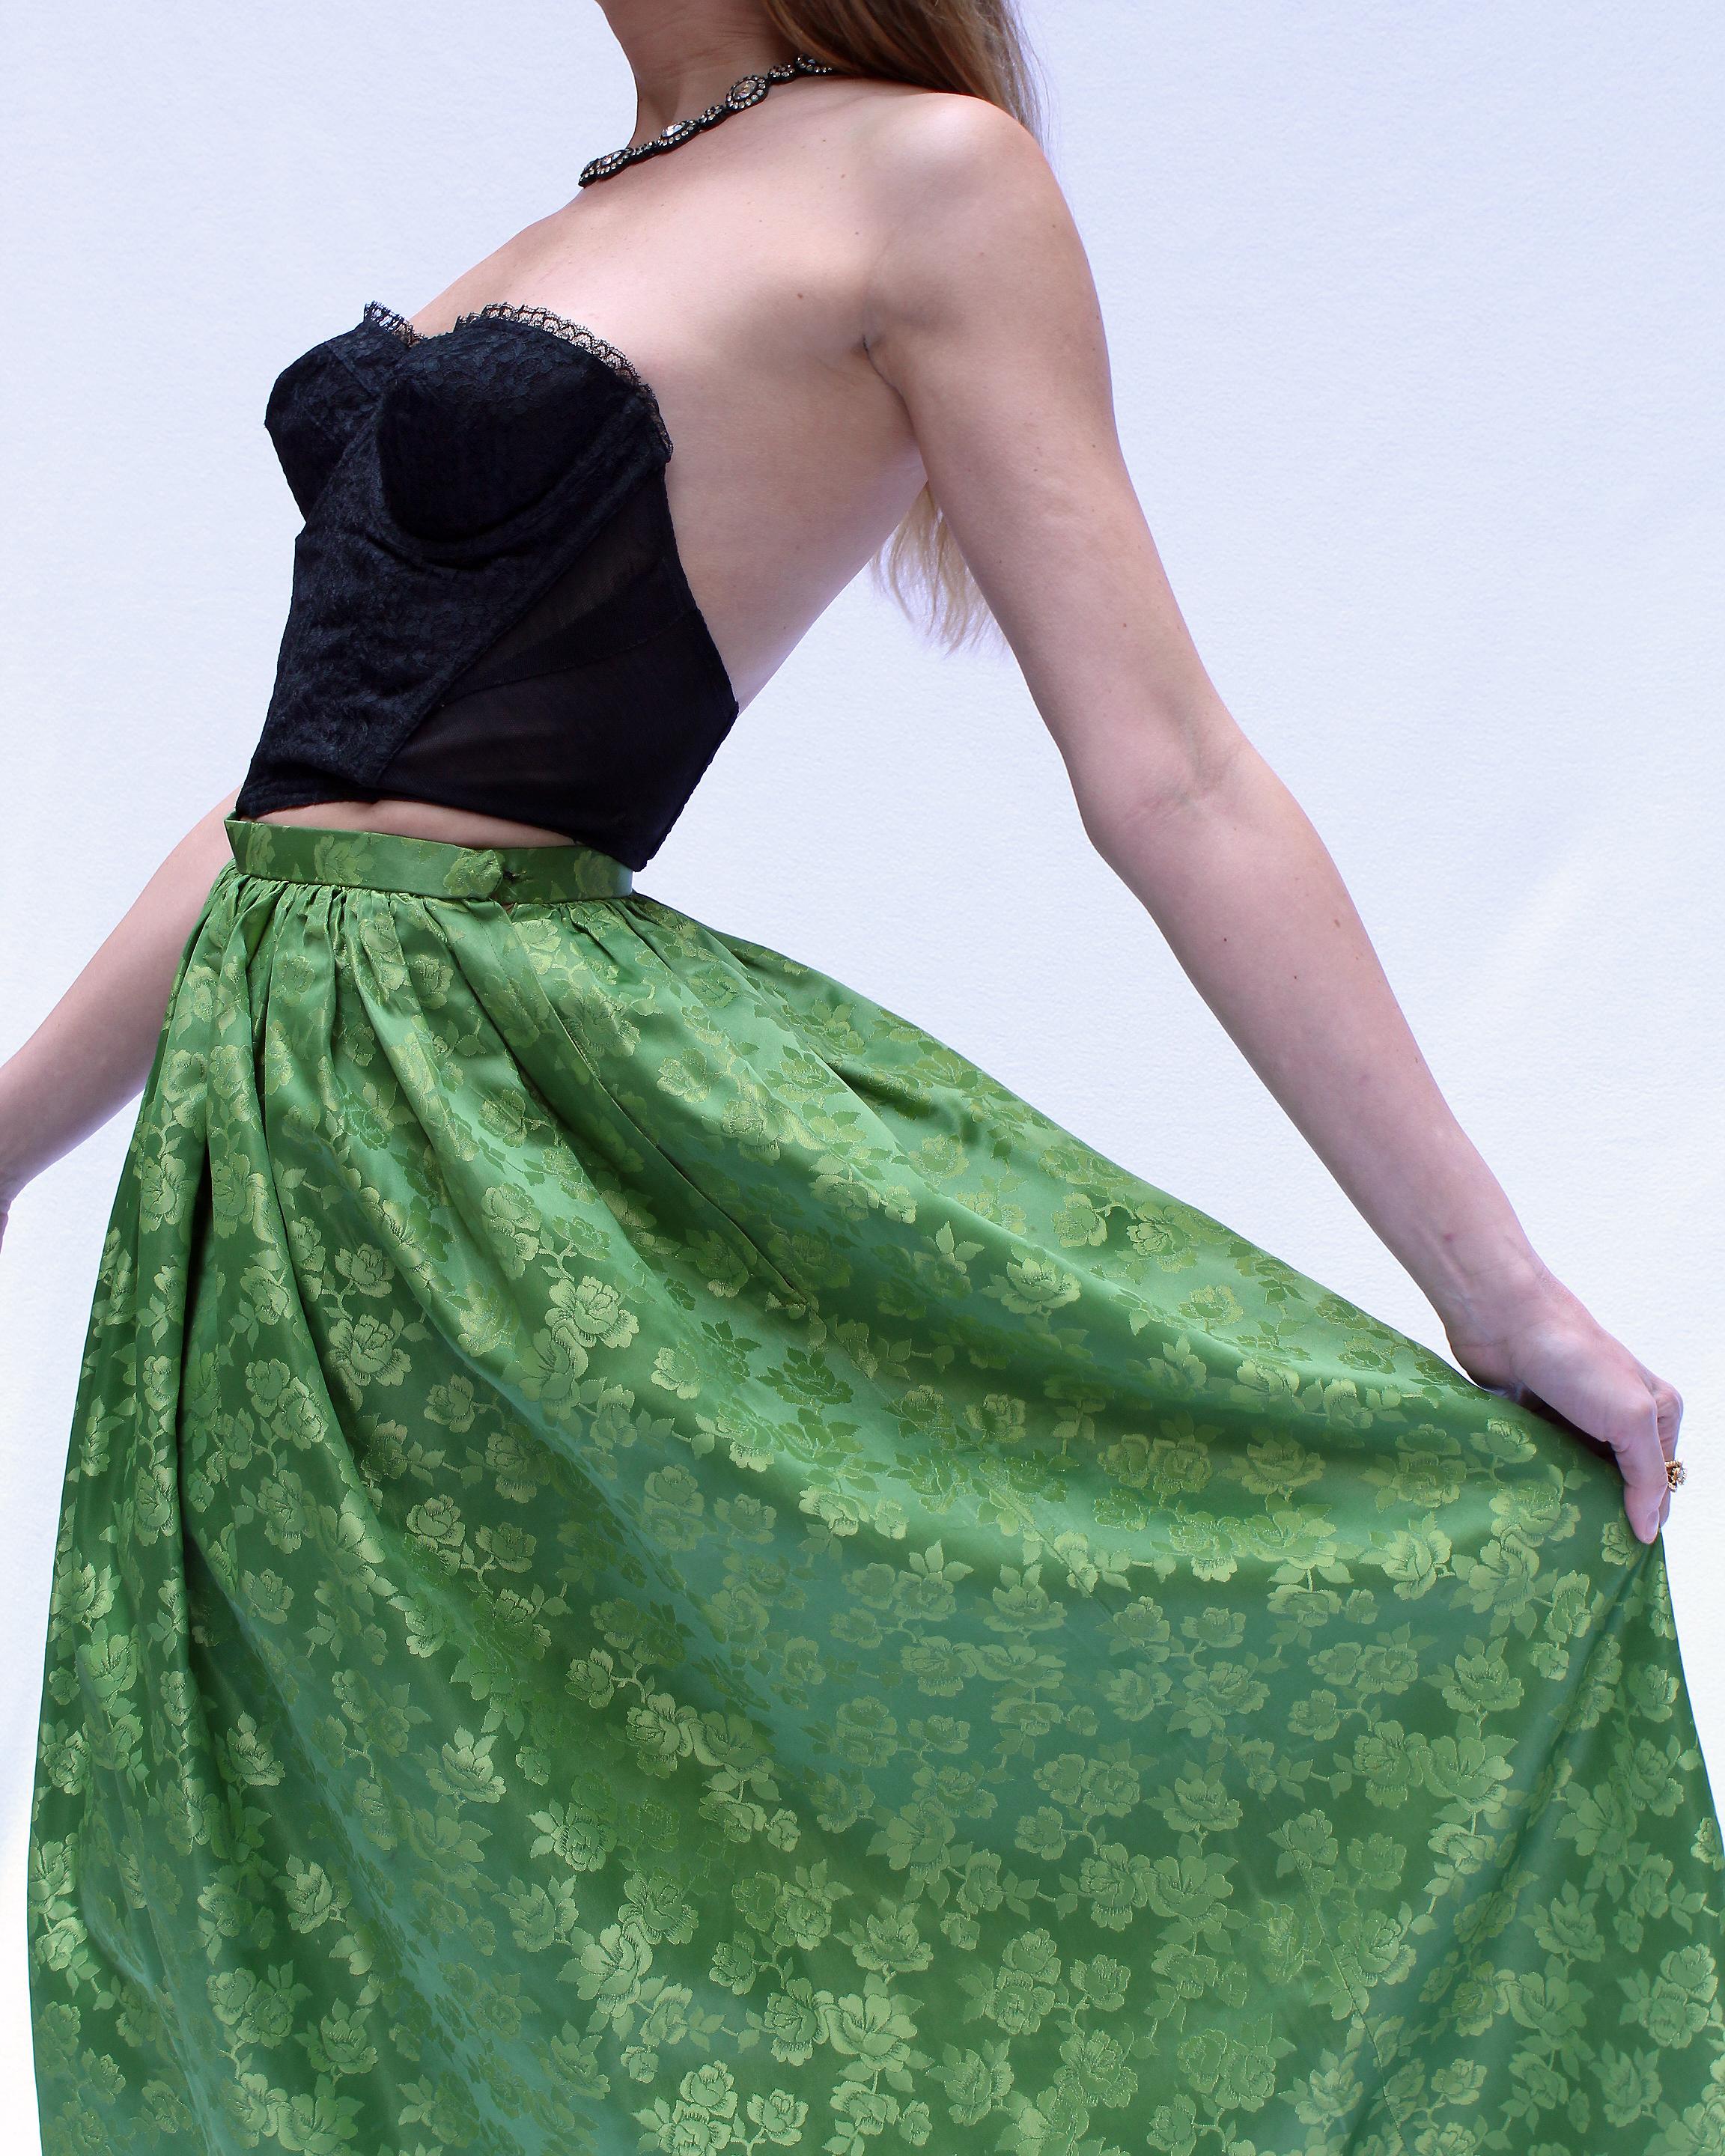 This vintage 1950s silk brocade ballskirt is a serious WOW moment, in the most vibrant shade of emerald green, one of my absolute favorite hues. It sits on the natural waist and features a gathered skirt, for the most magnificent swoosh. It was